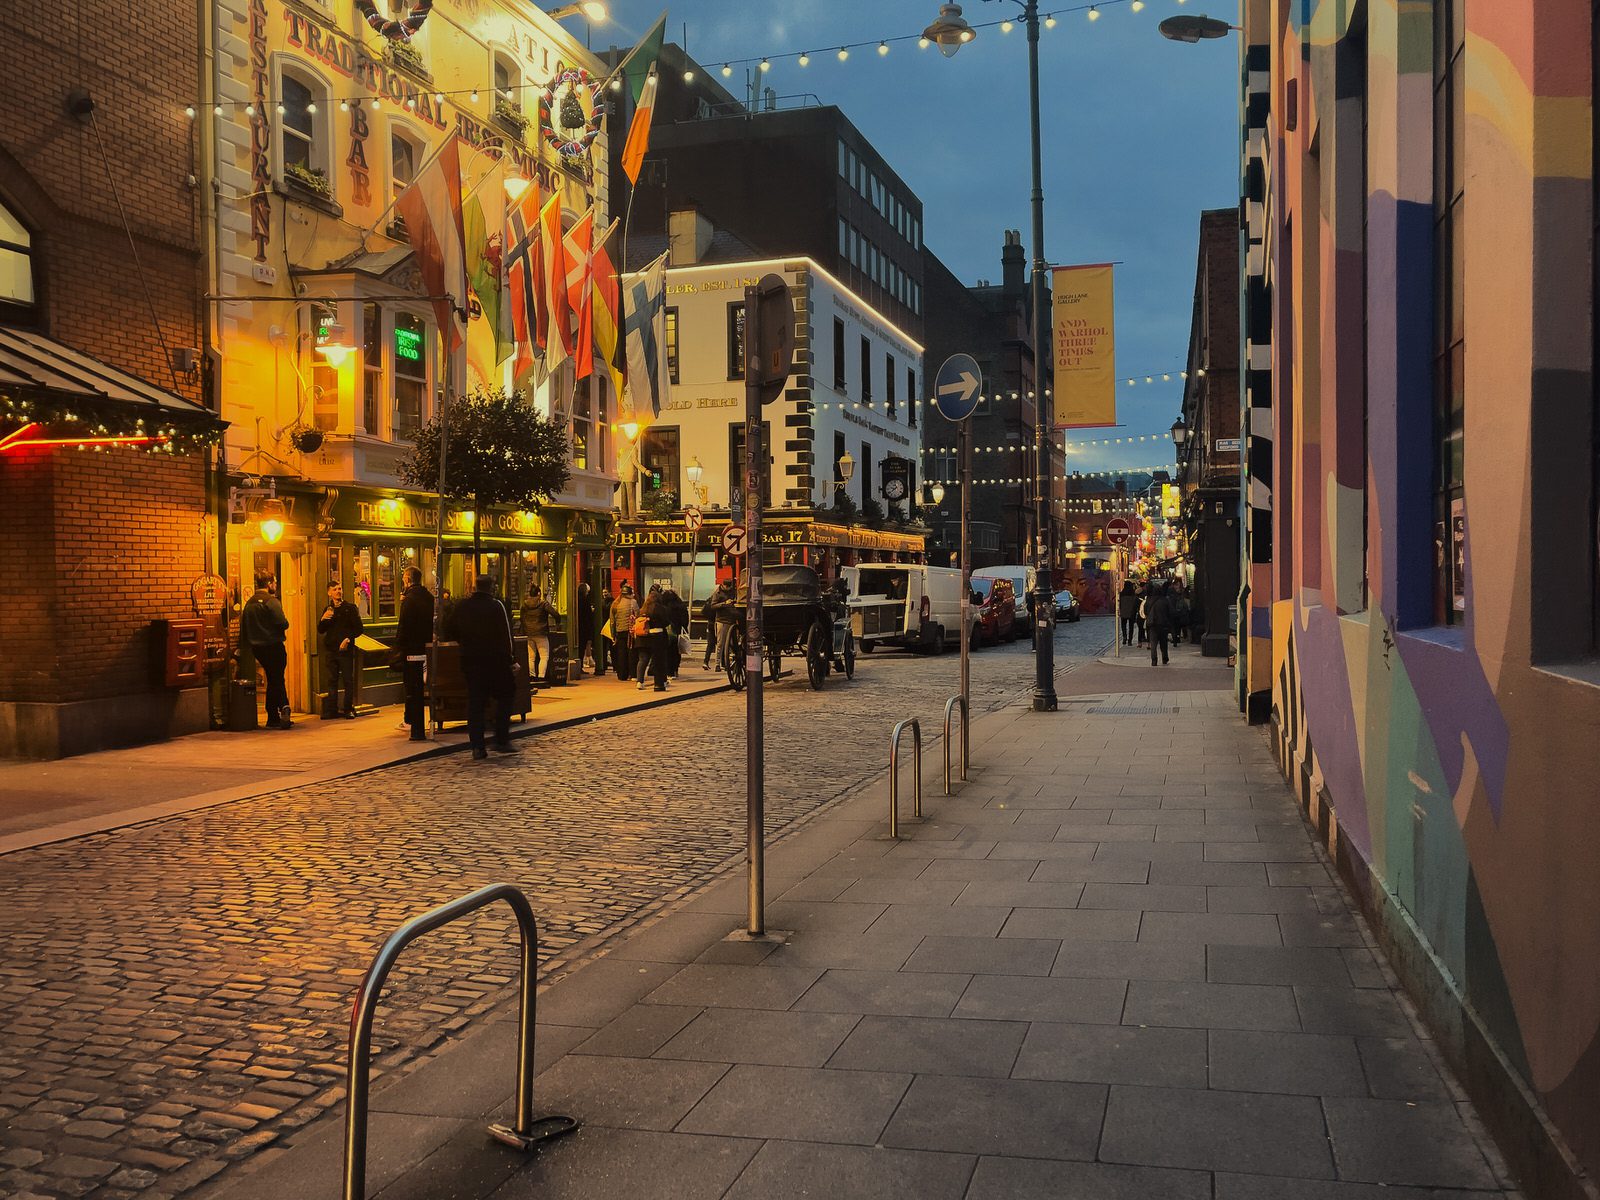 I VISITED TEMPLE BAR TODAY [AS NIGHTFALL WAS APPROACHING]-225332-1